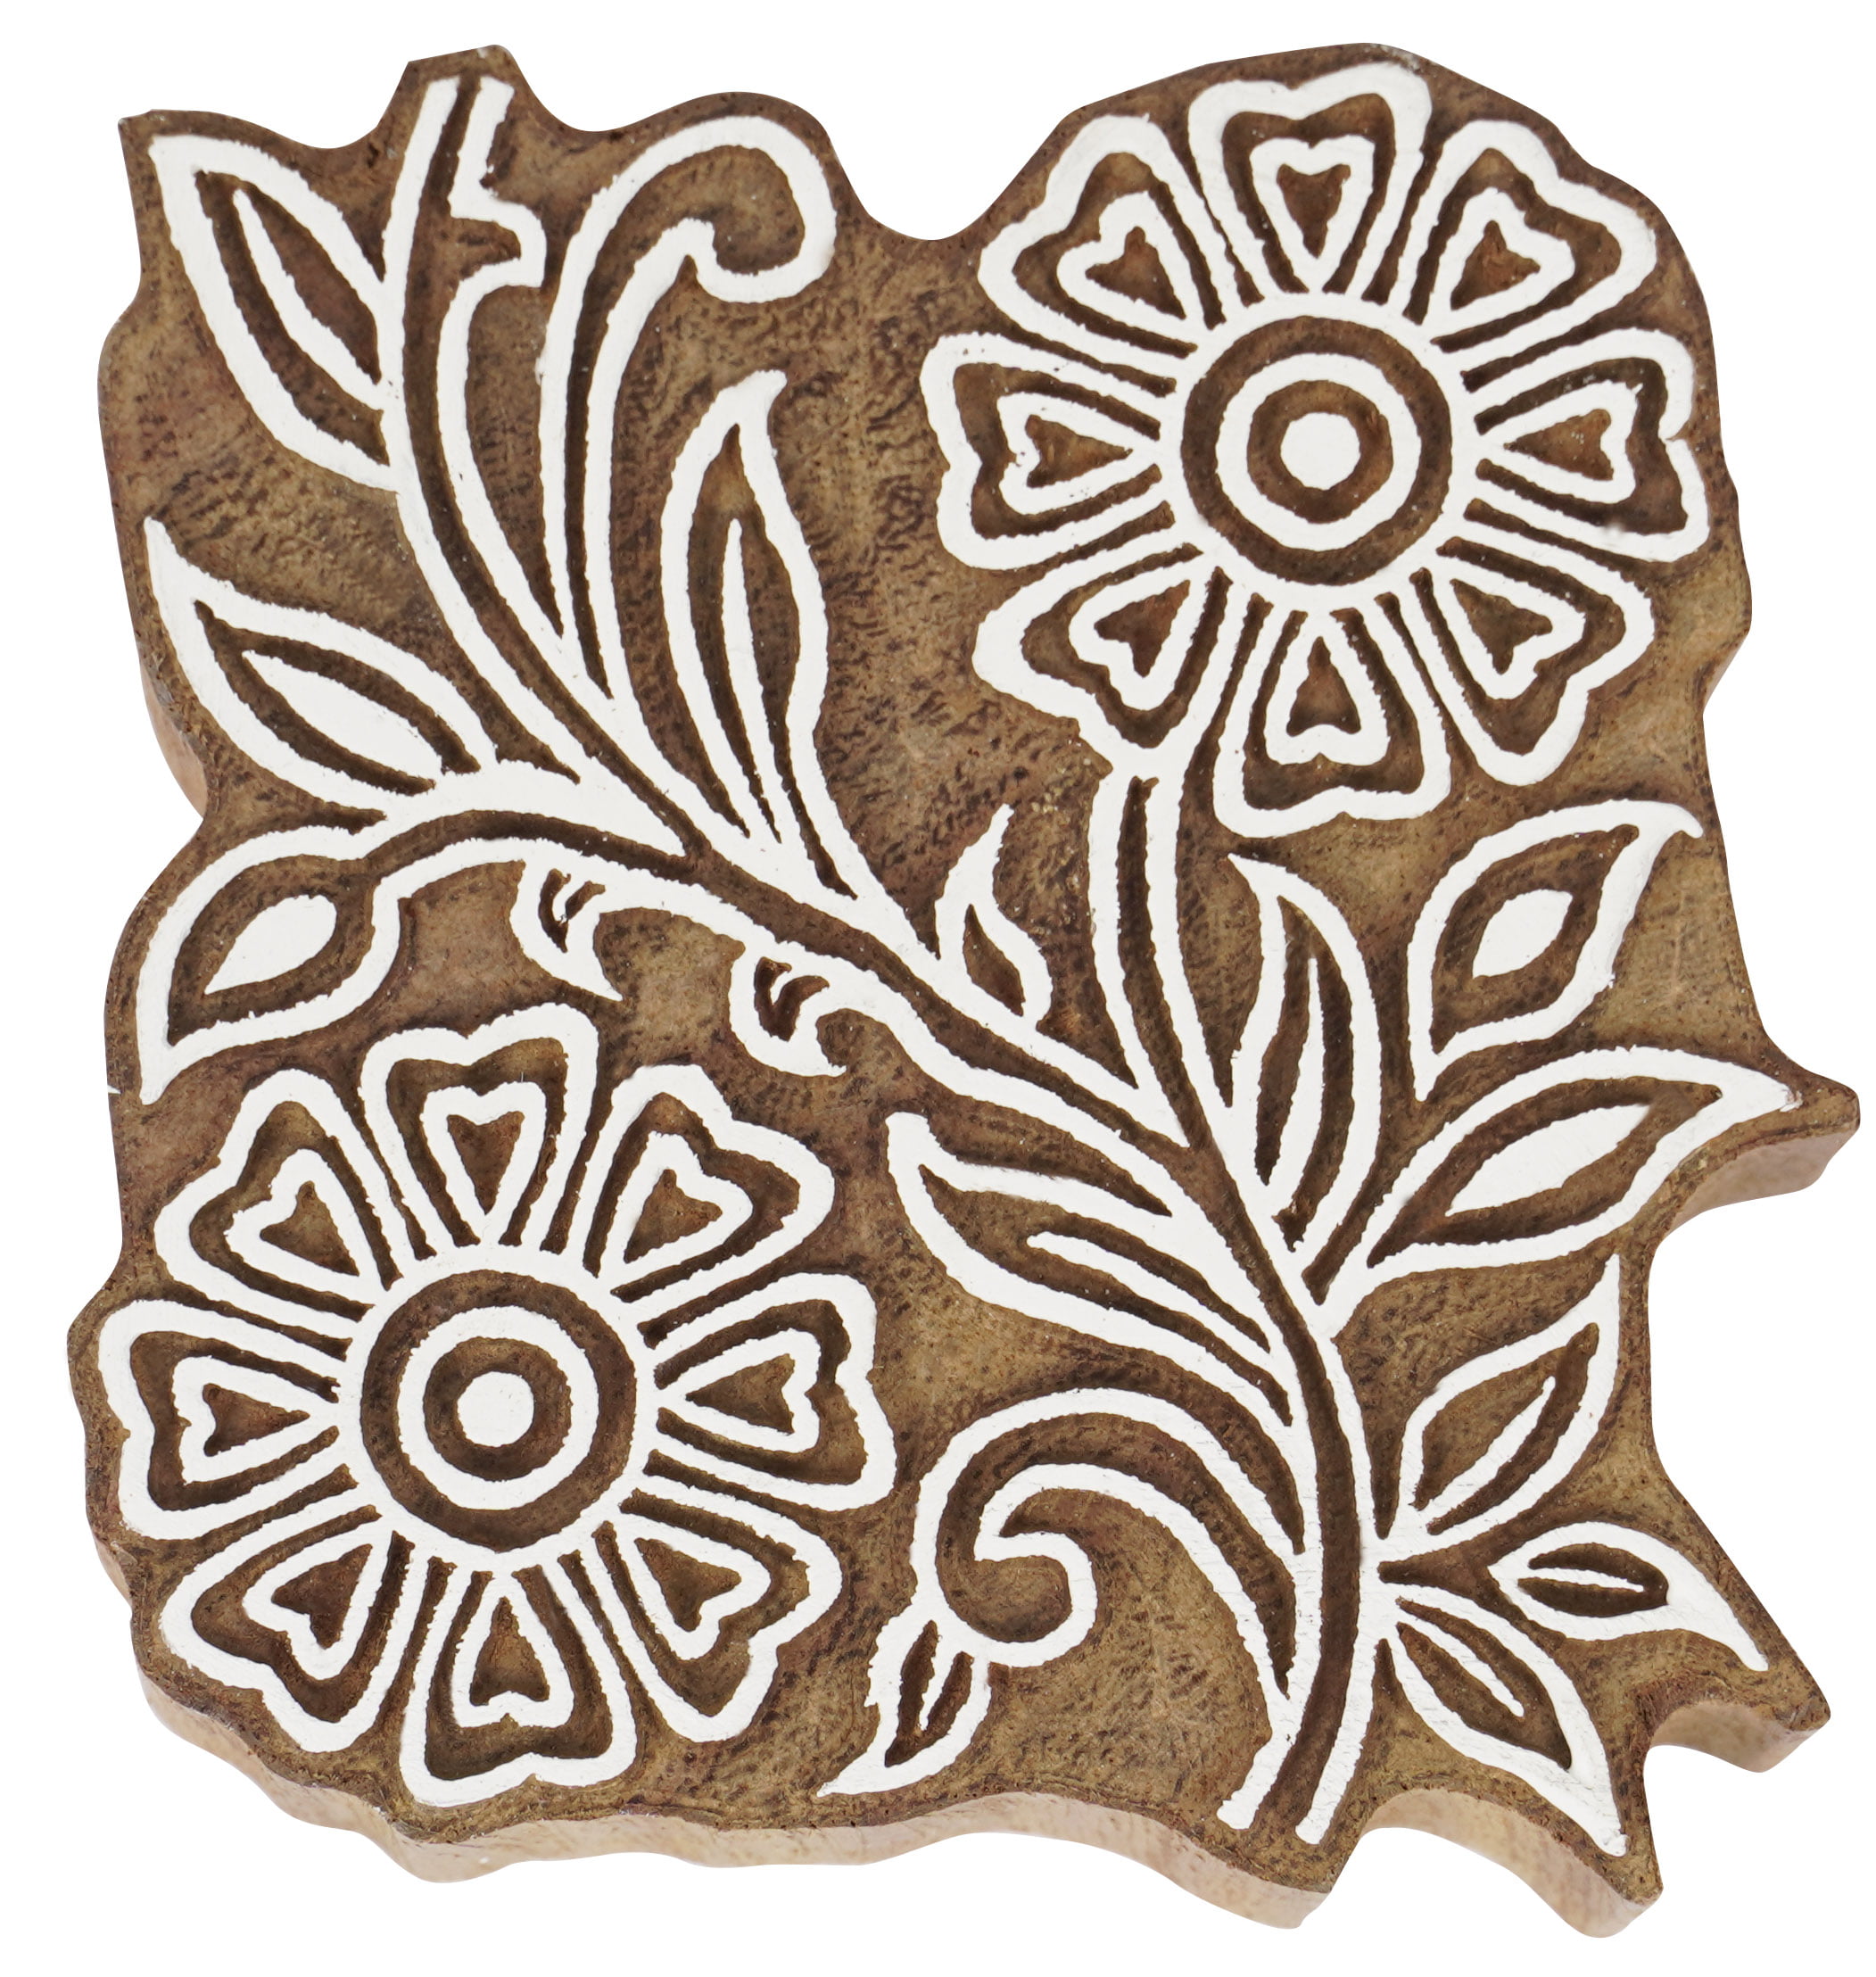 Hand-Carved Elm Tree Wood Bread Stamp with Bloom Figure - Blooming